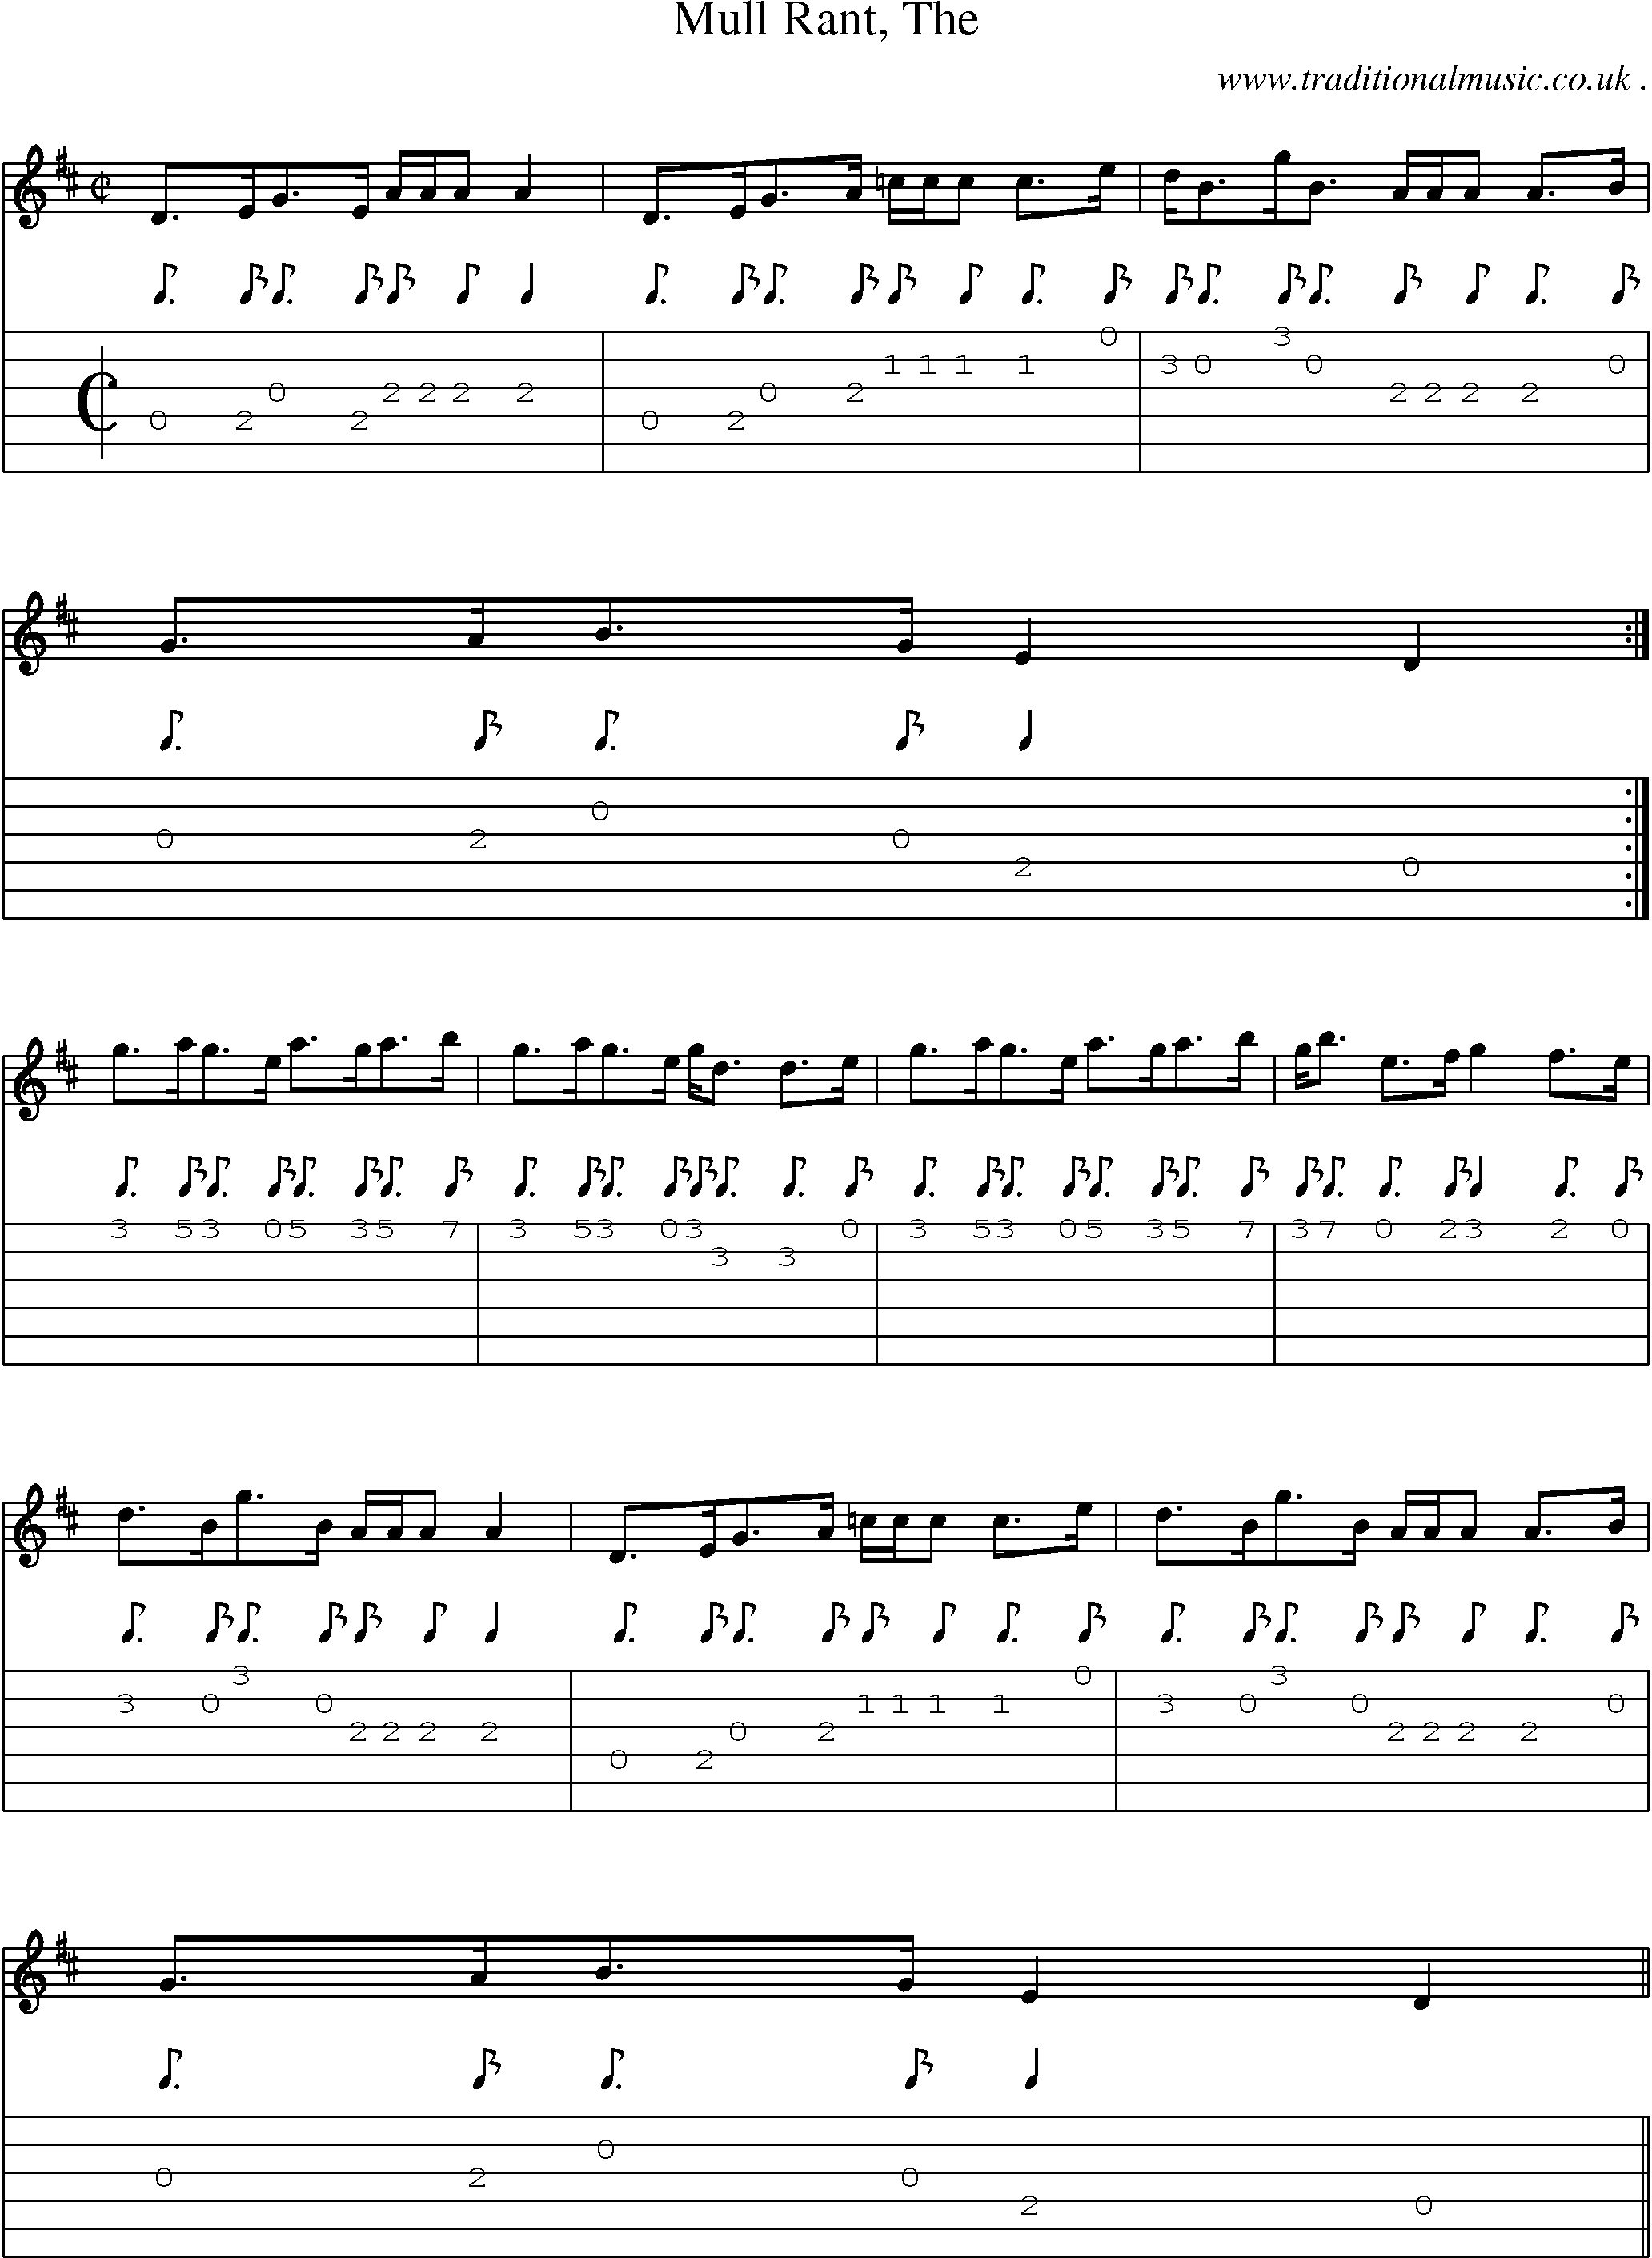 Sheet-music  score, Chords and Guitar Tabs for Mull Rant The